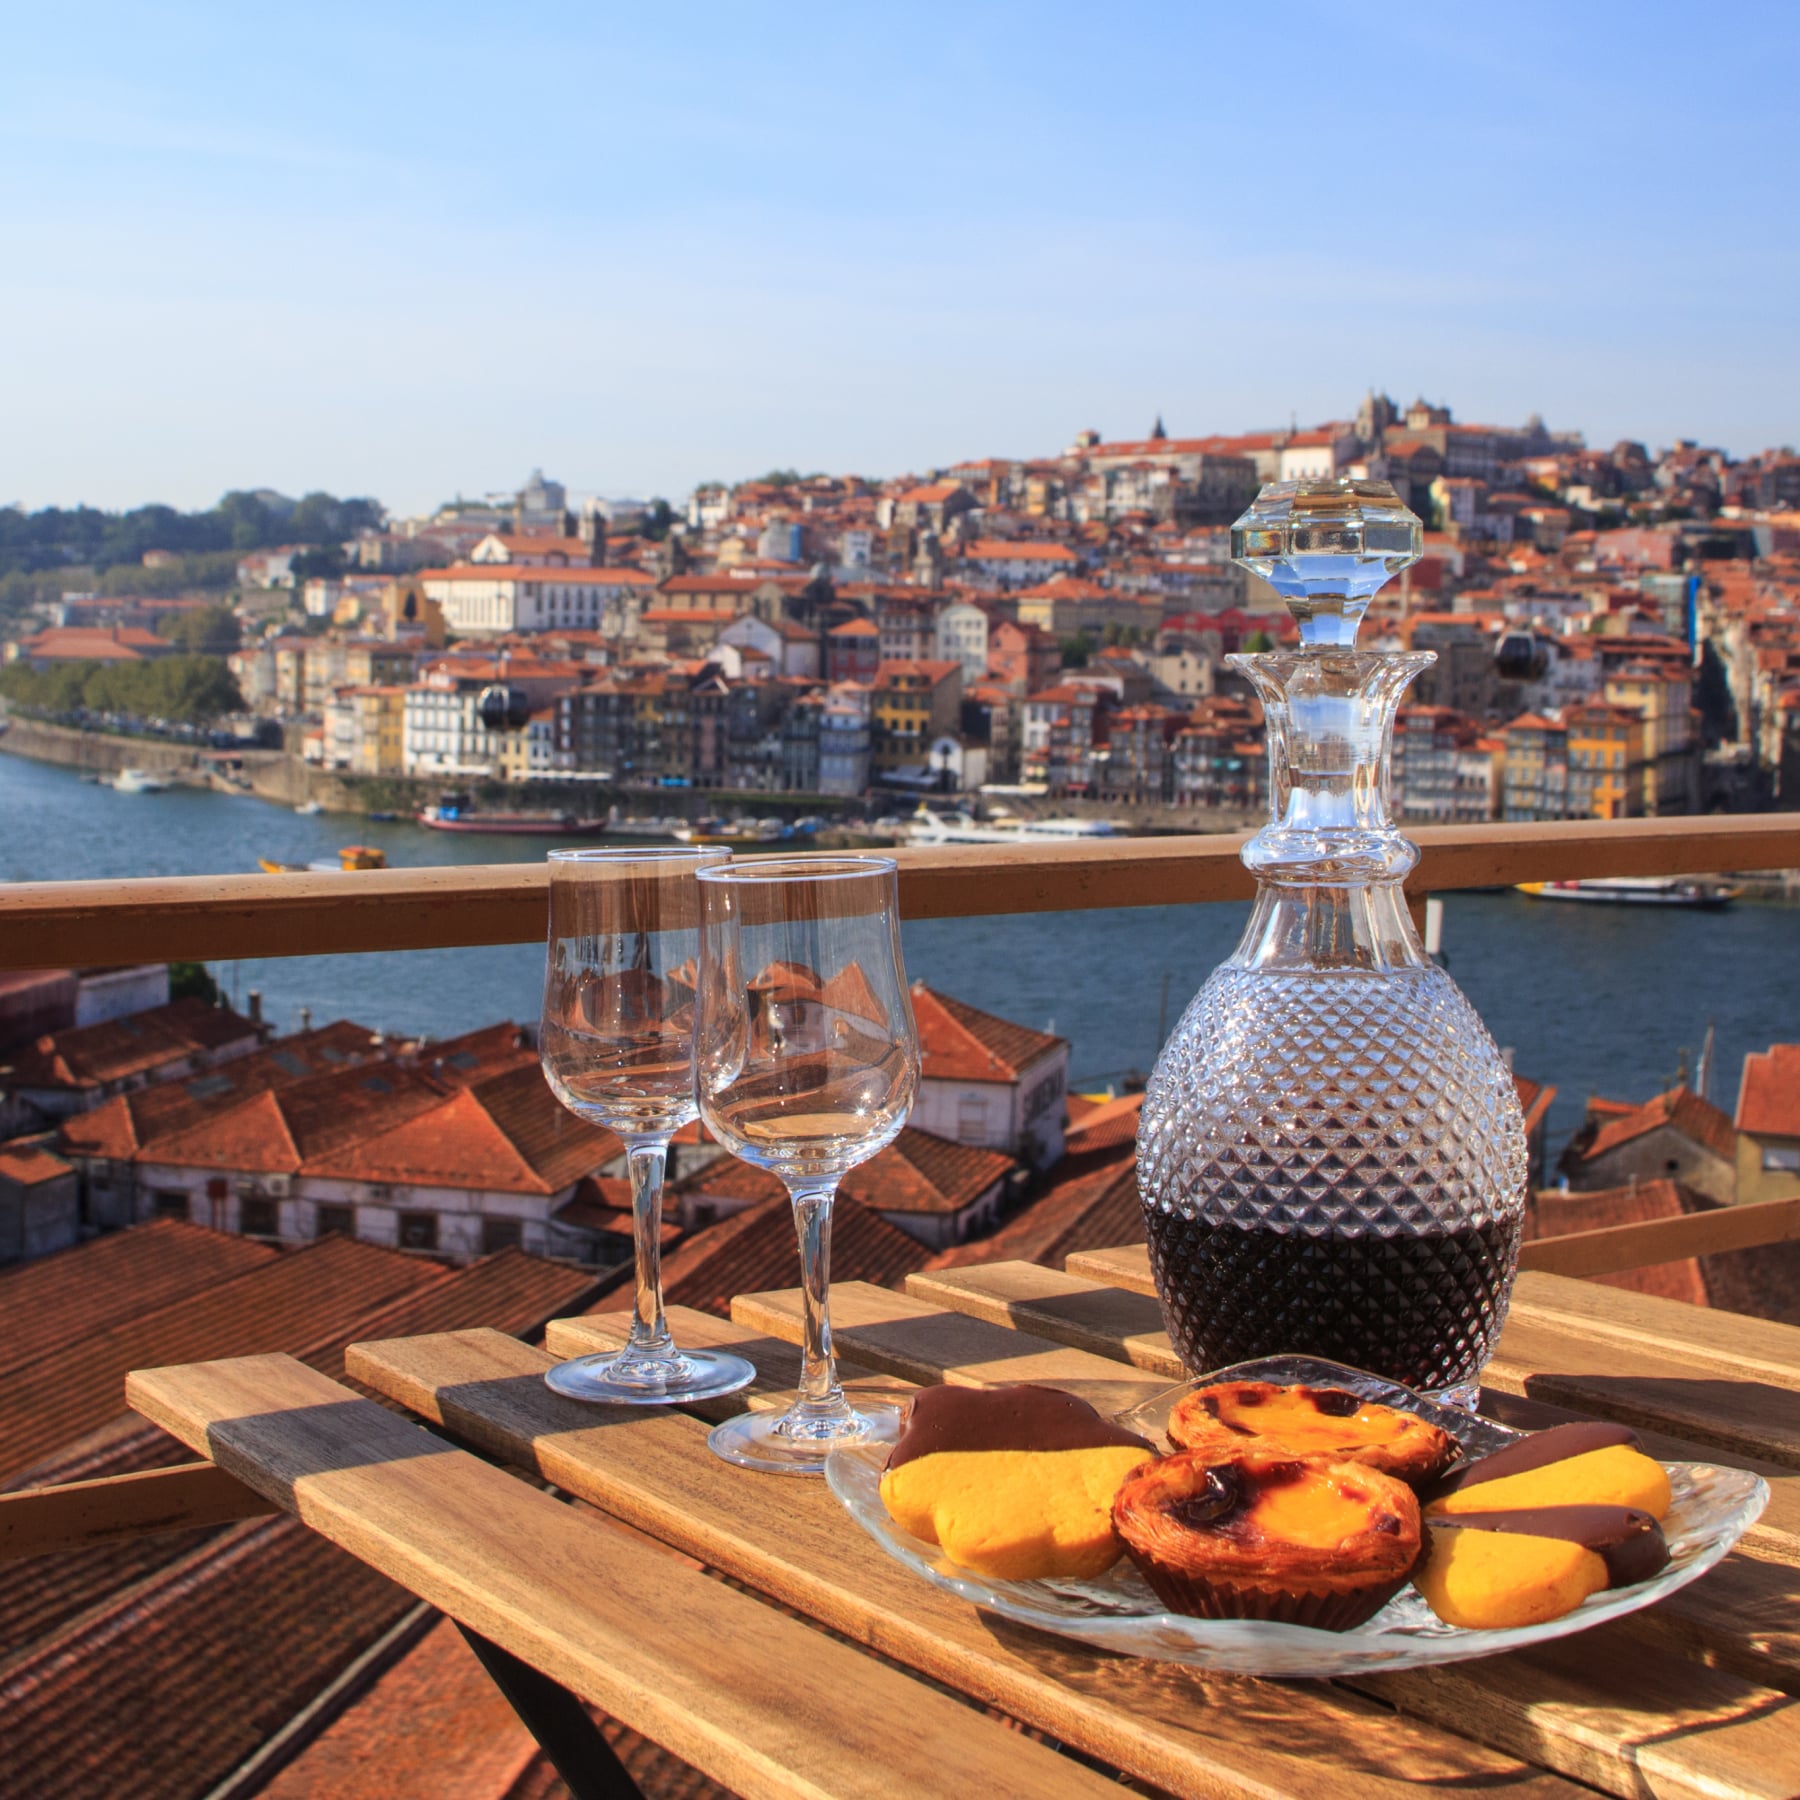 Porto is an ideal place for a wine tasting holiday